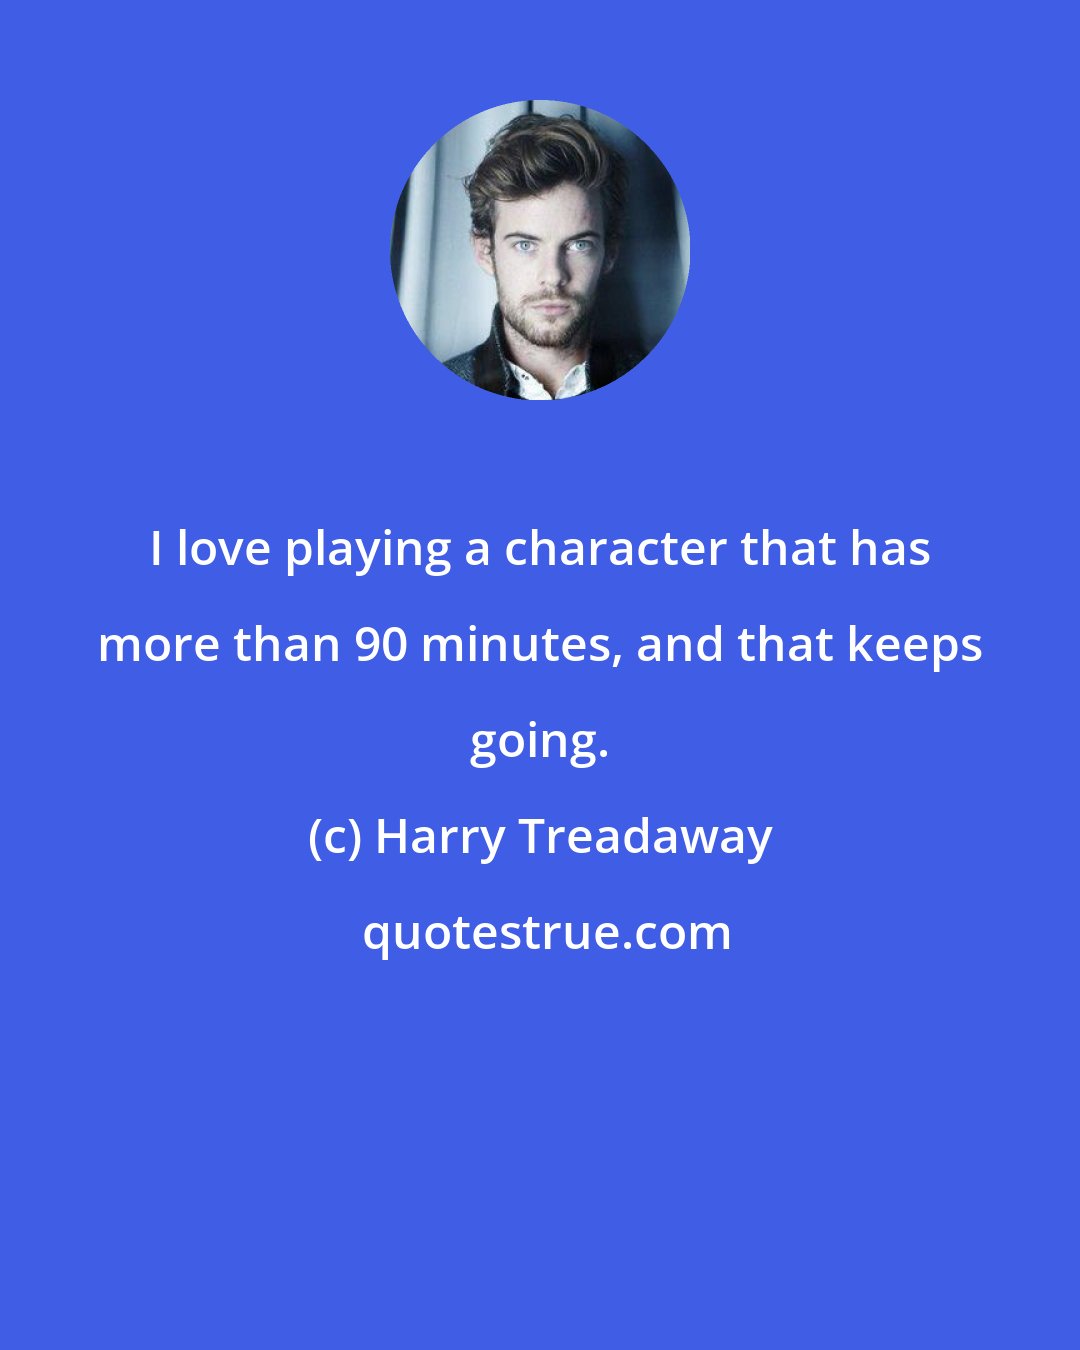 Harry Treadaway: I love playing a character that has more than 90 minutes, and that keeps going.